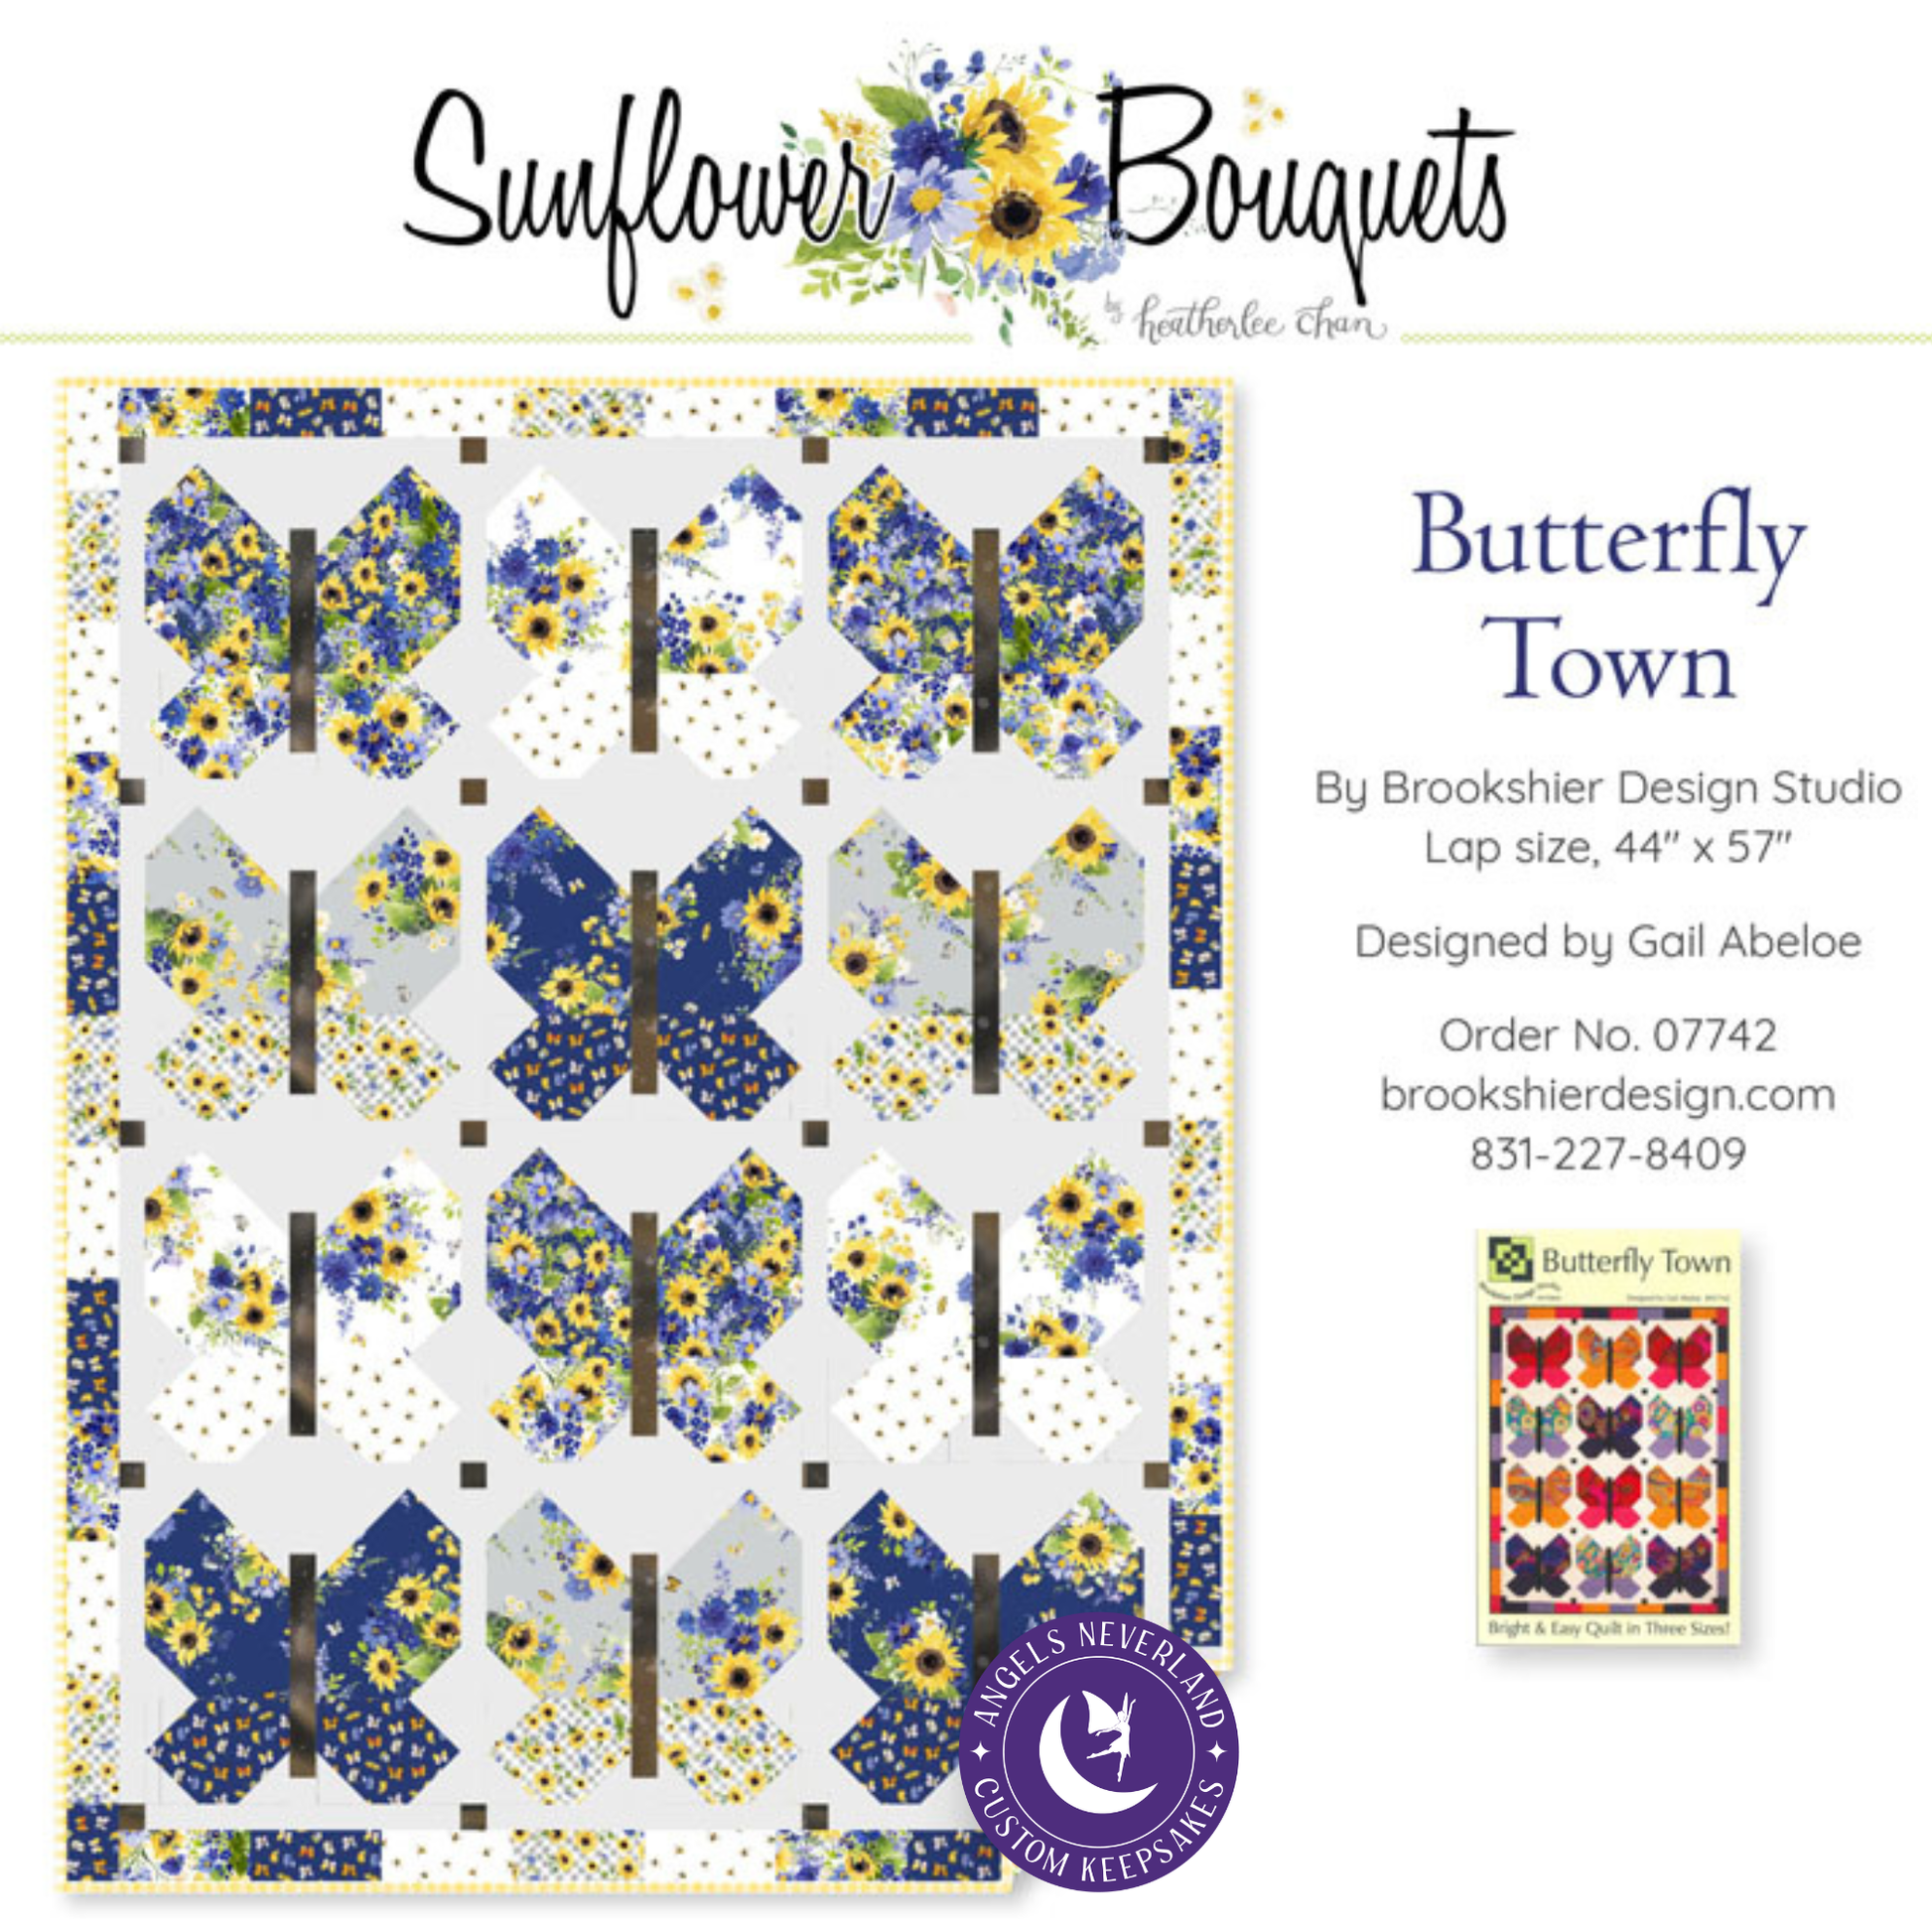 Clothworks Quilt Kit Quilt Kit Only (Top/Binding/Pattern) Sunflower Bouquets Butterfly Town QUILT KIT approximate finished size 44" x57"